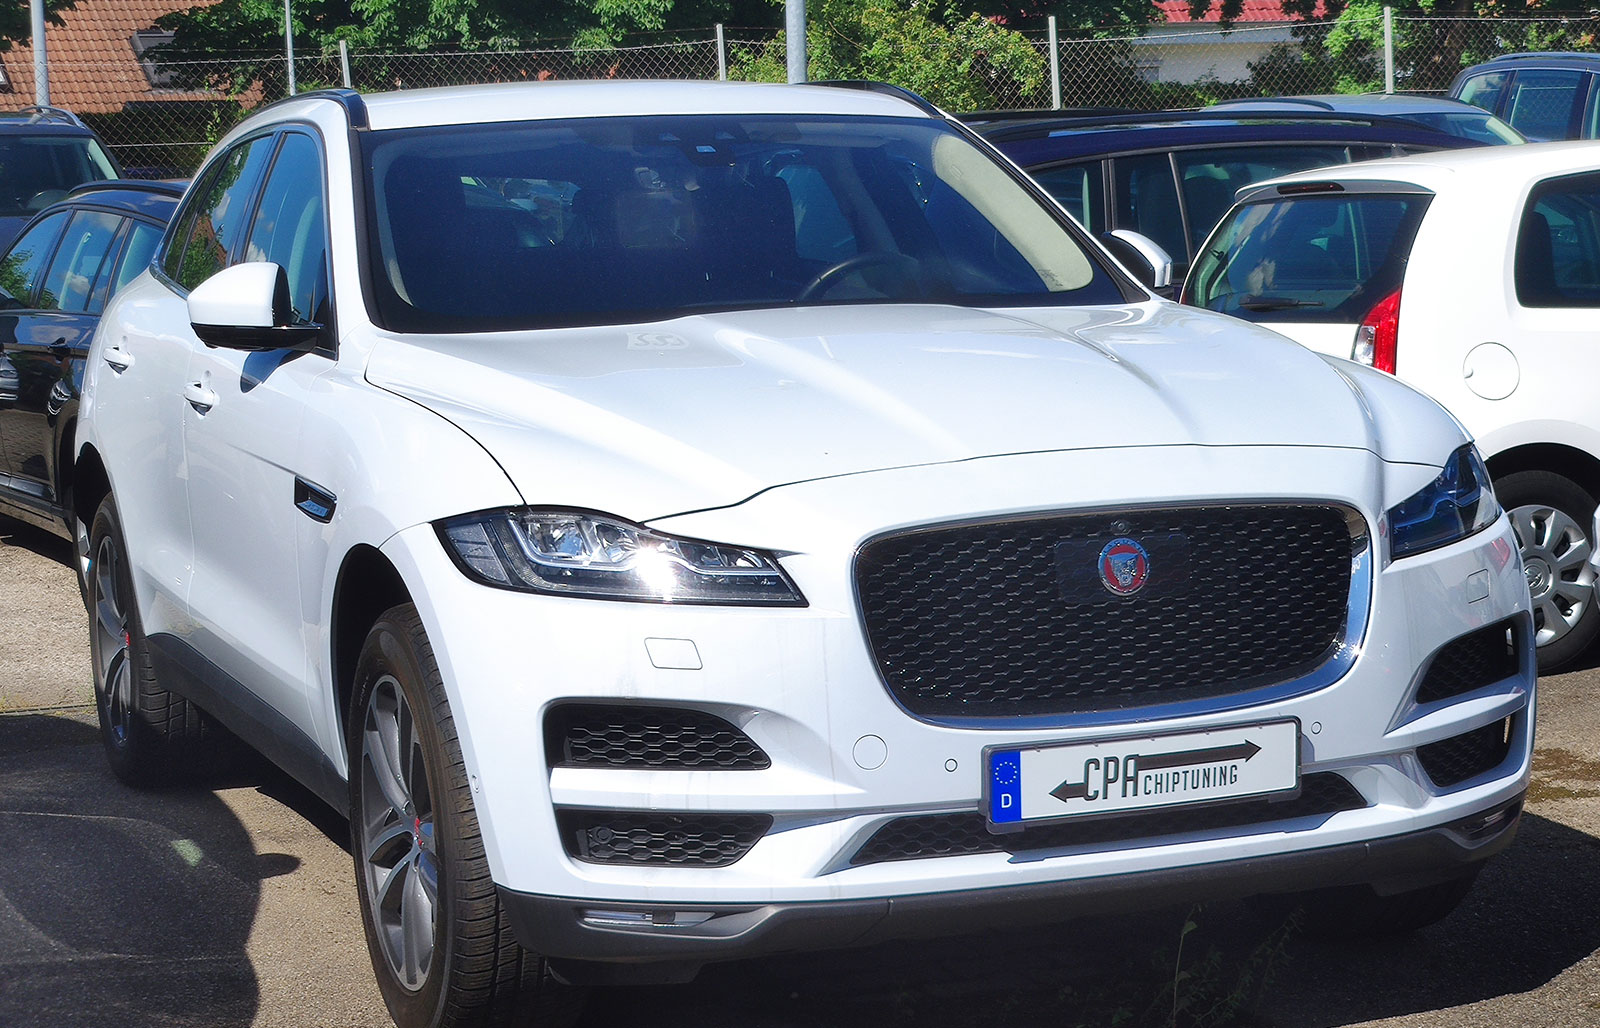 The Jaguar F-Pace at CPA test